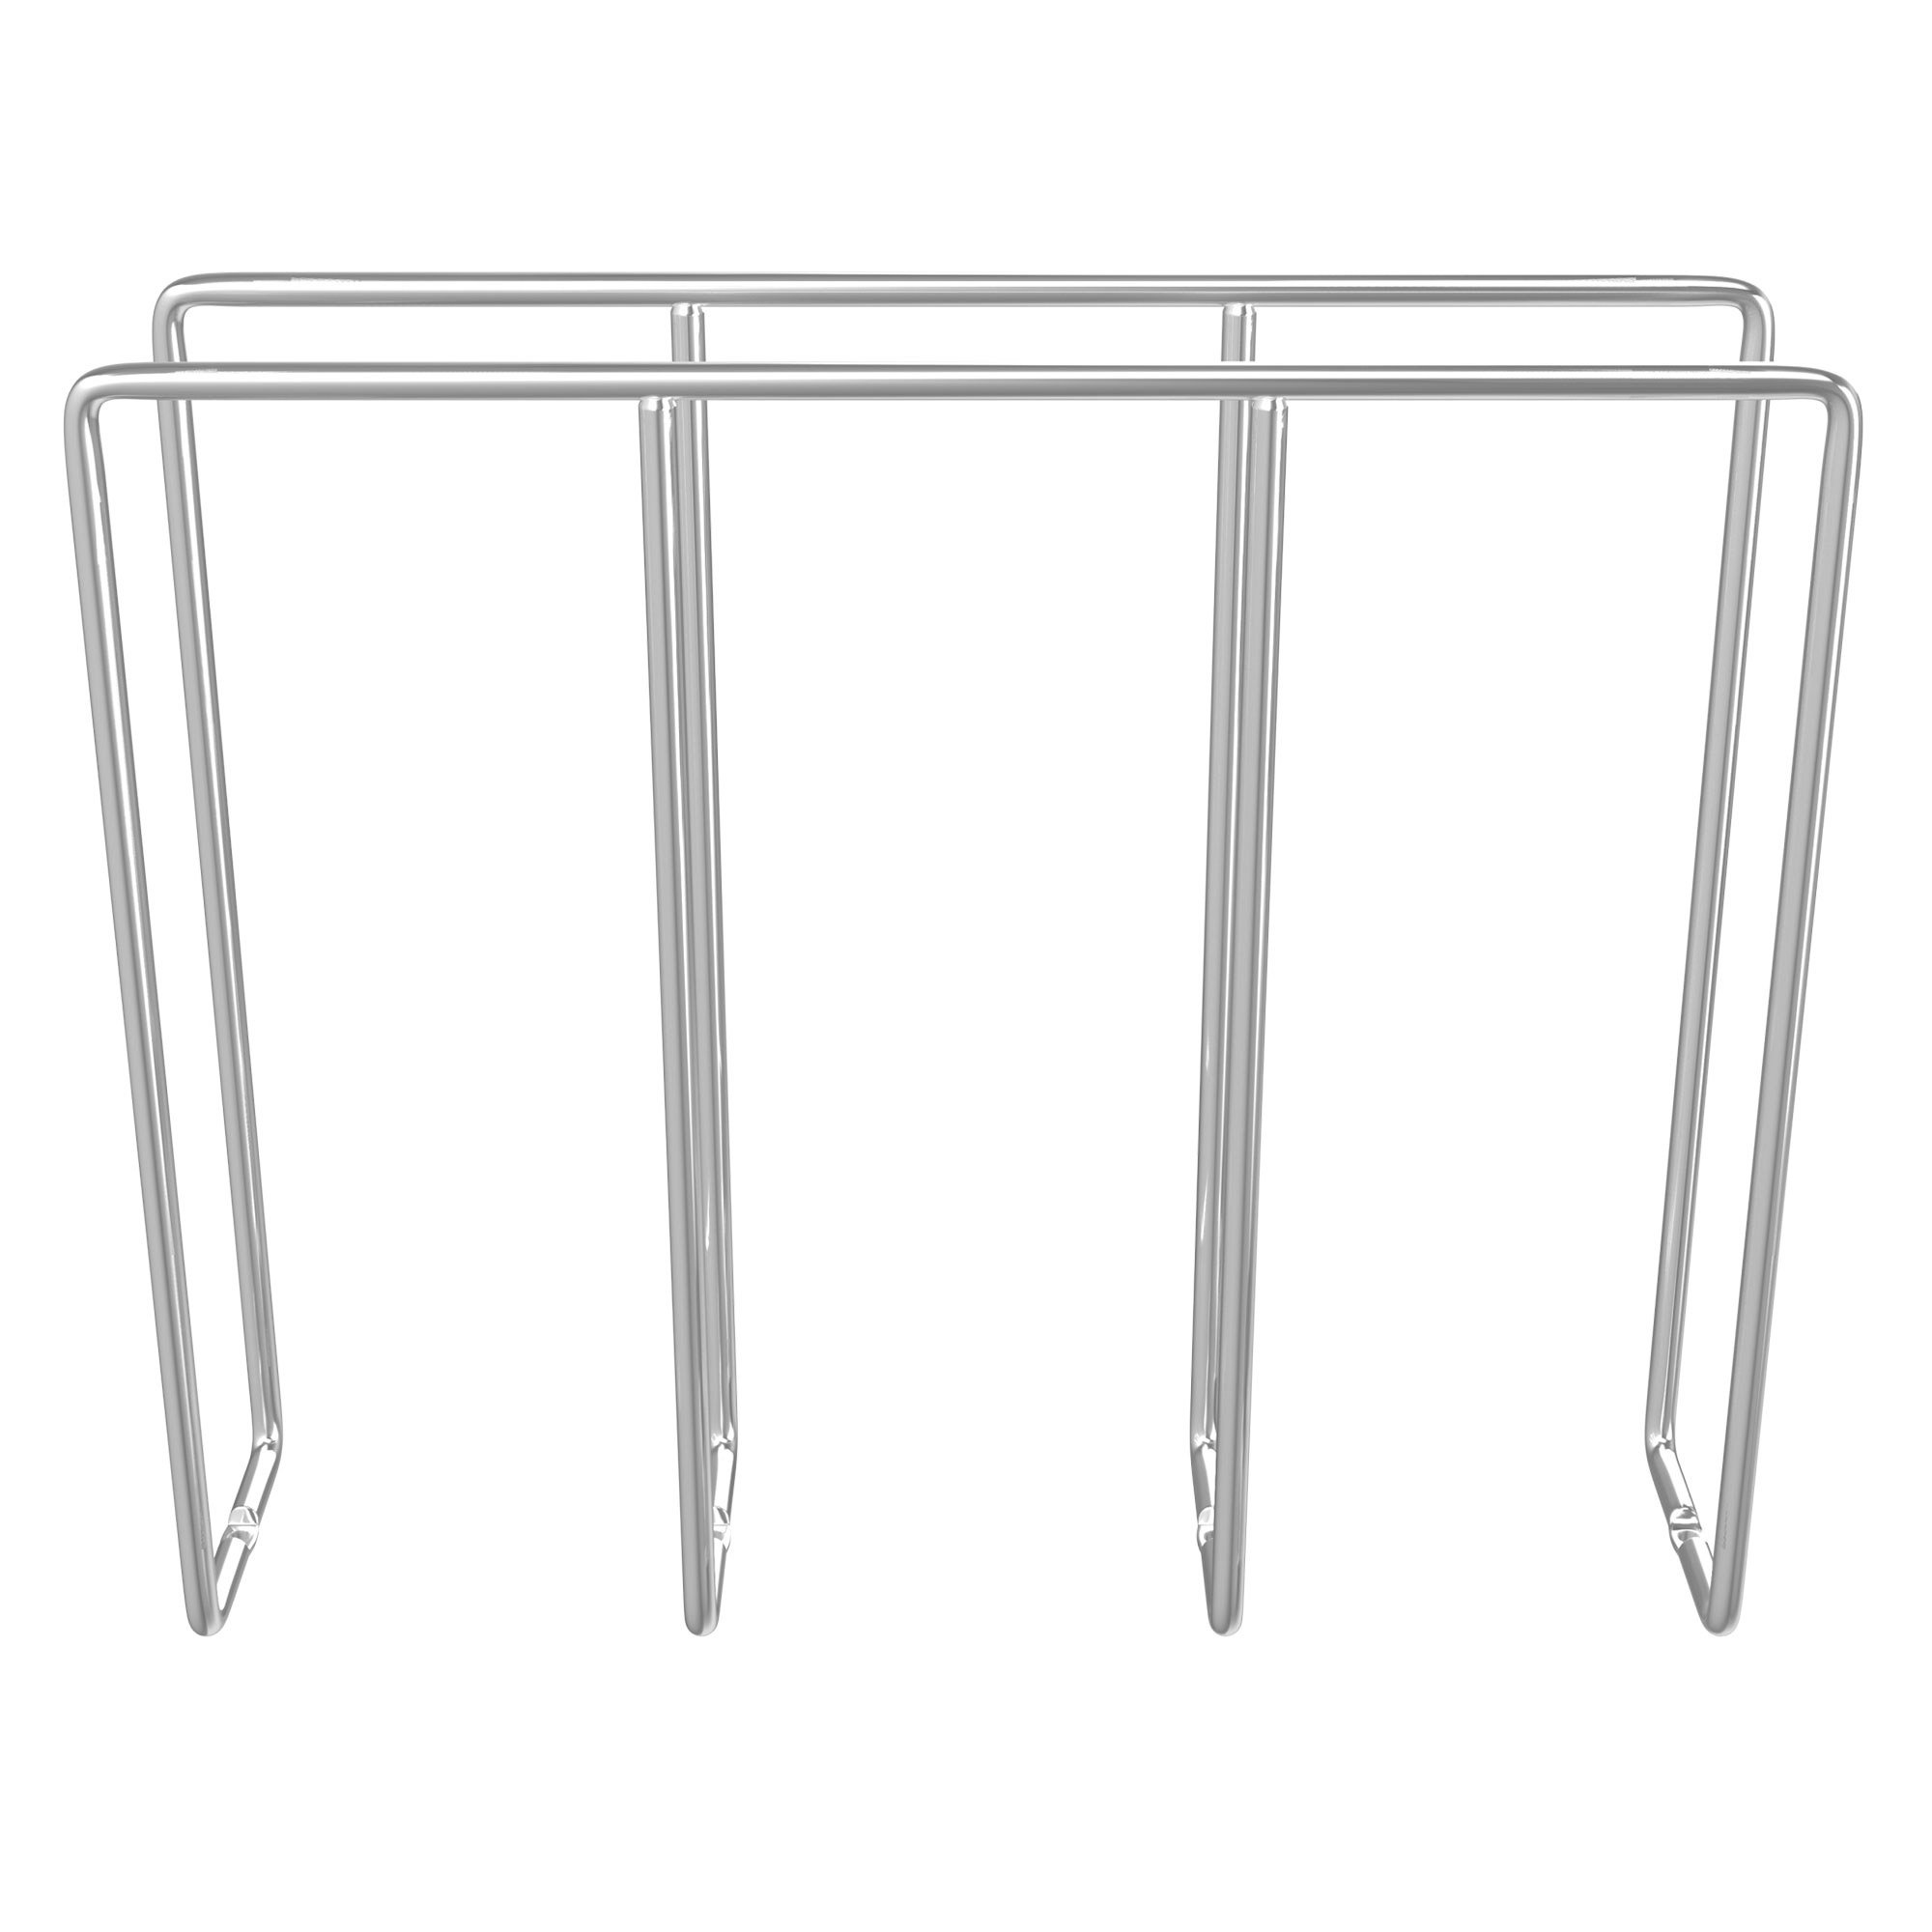  Rev-a-Shelf Rev-a-Shelf Tray Divider with Clips, White, Metal,  12 in. - Tray Dividers For Cabinets